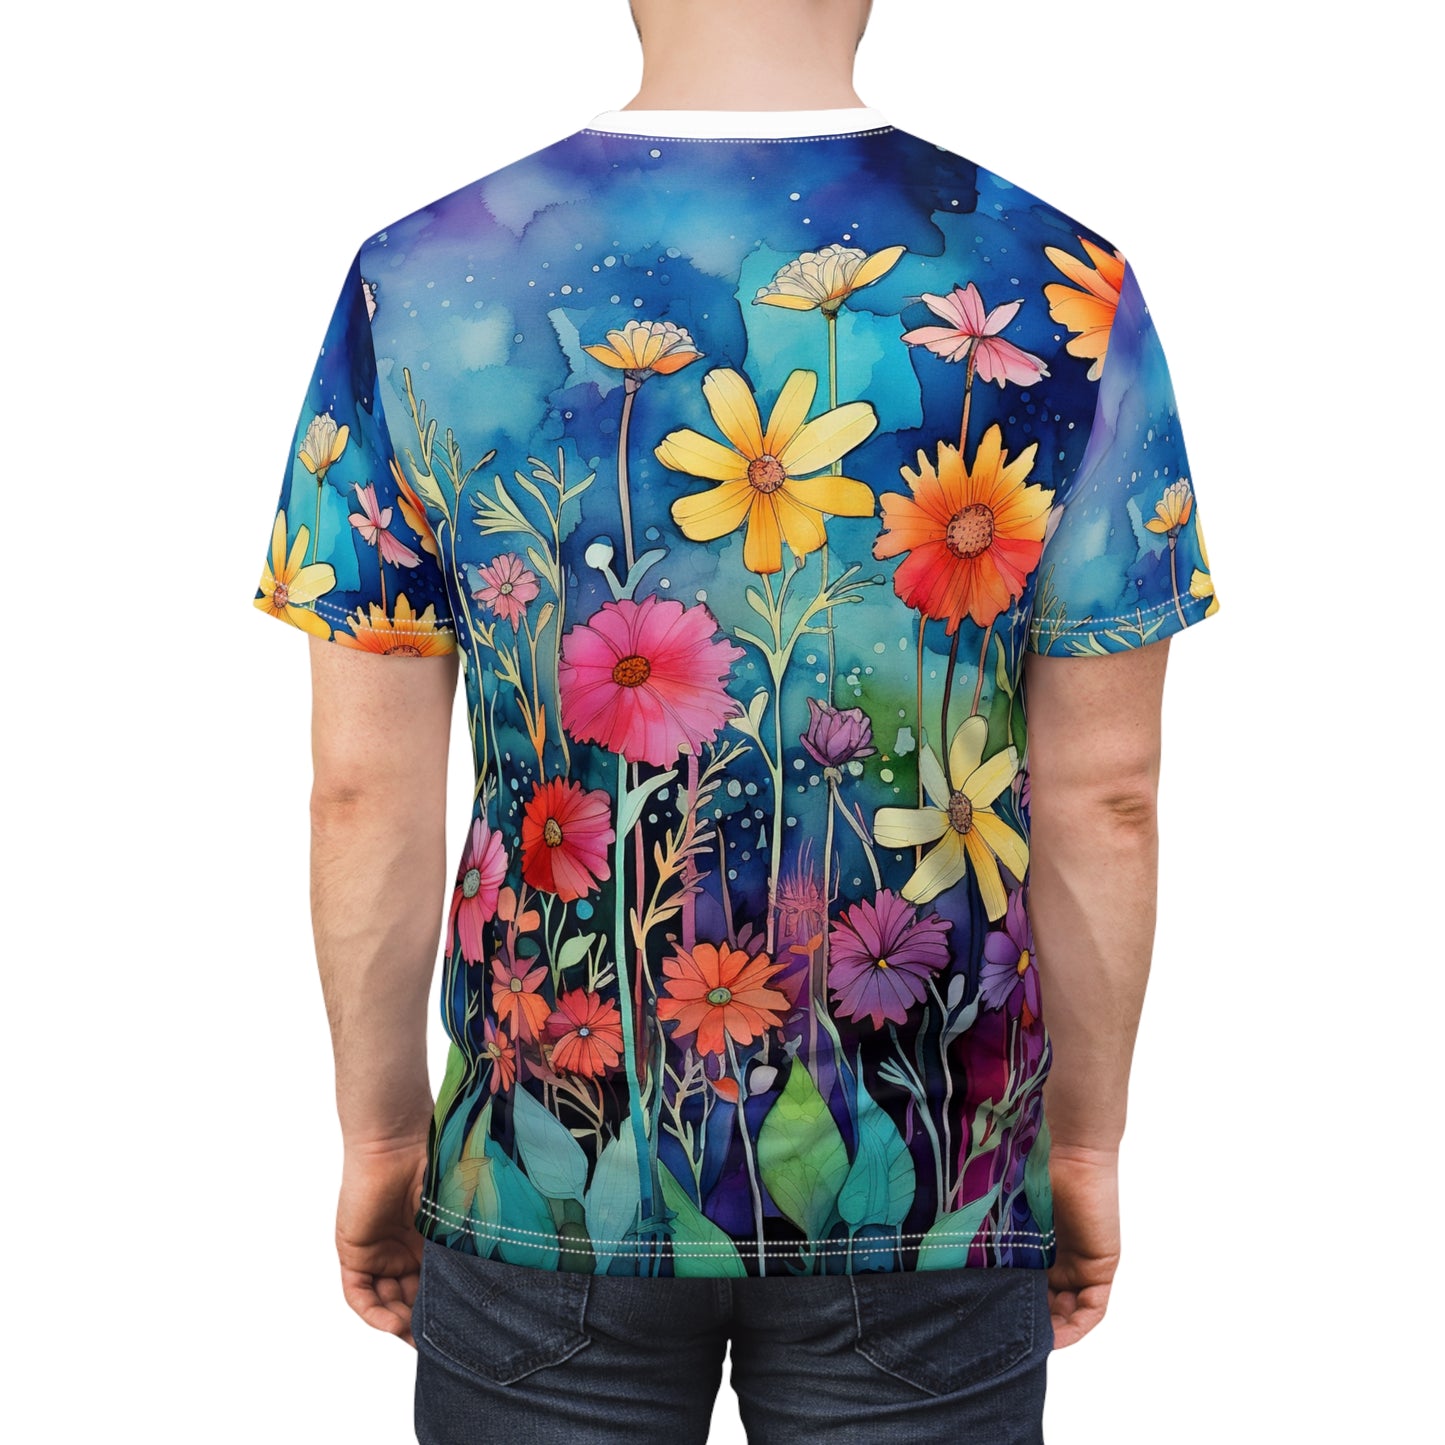 Floral Design, Wild Flowers Filed, Abstract Style, Unisex Tee